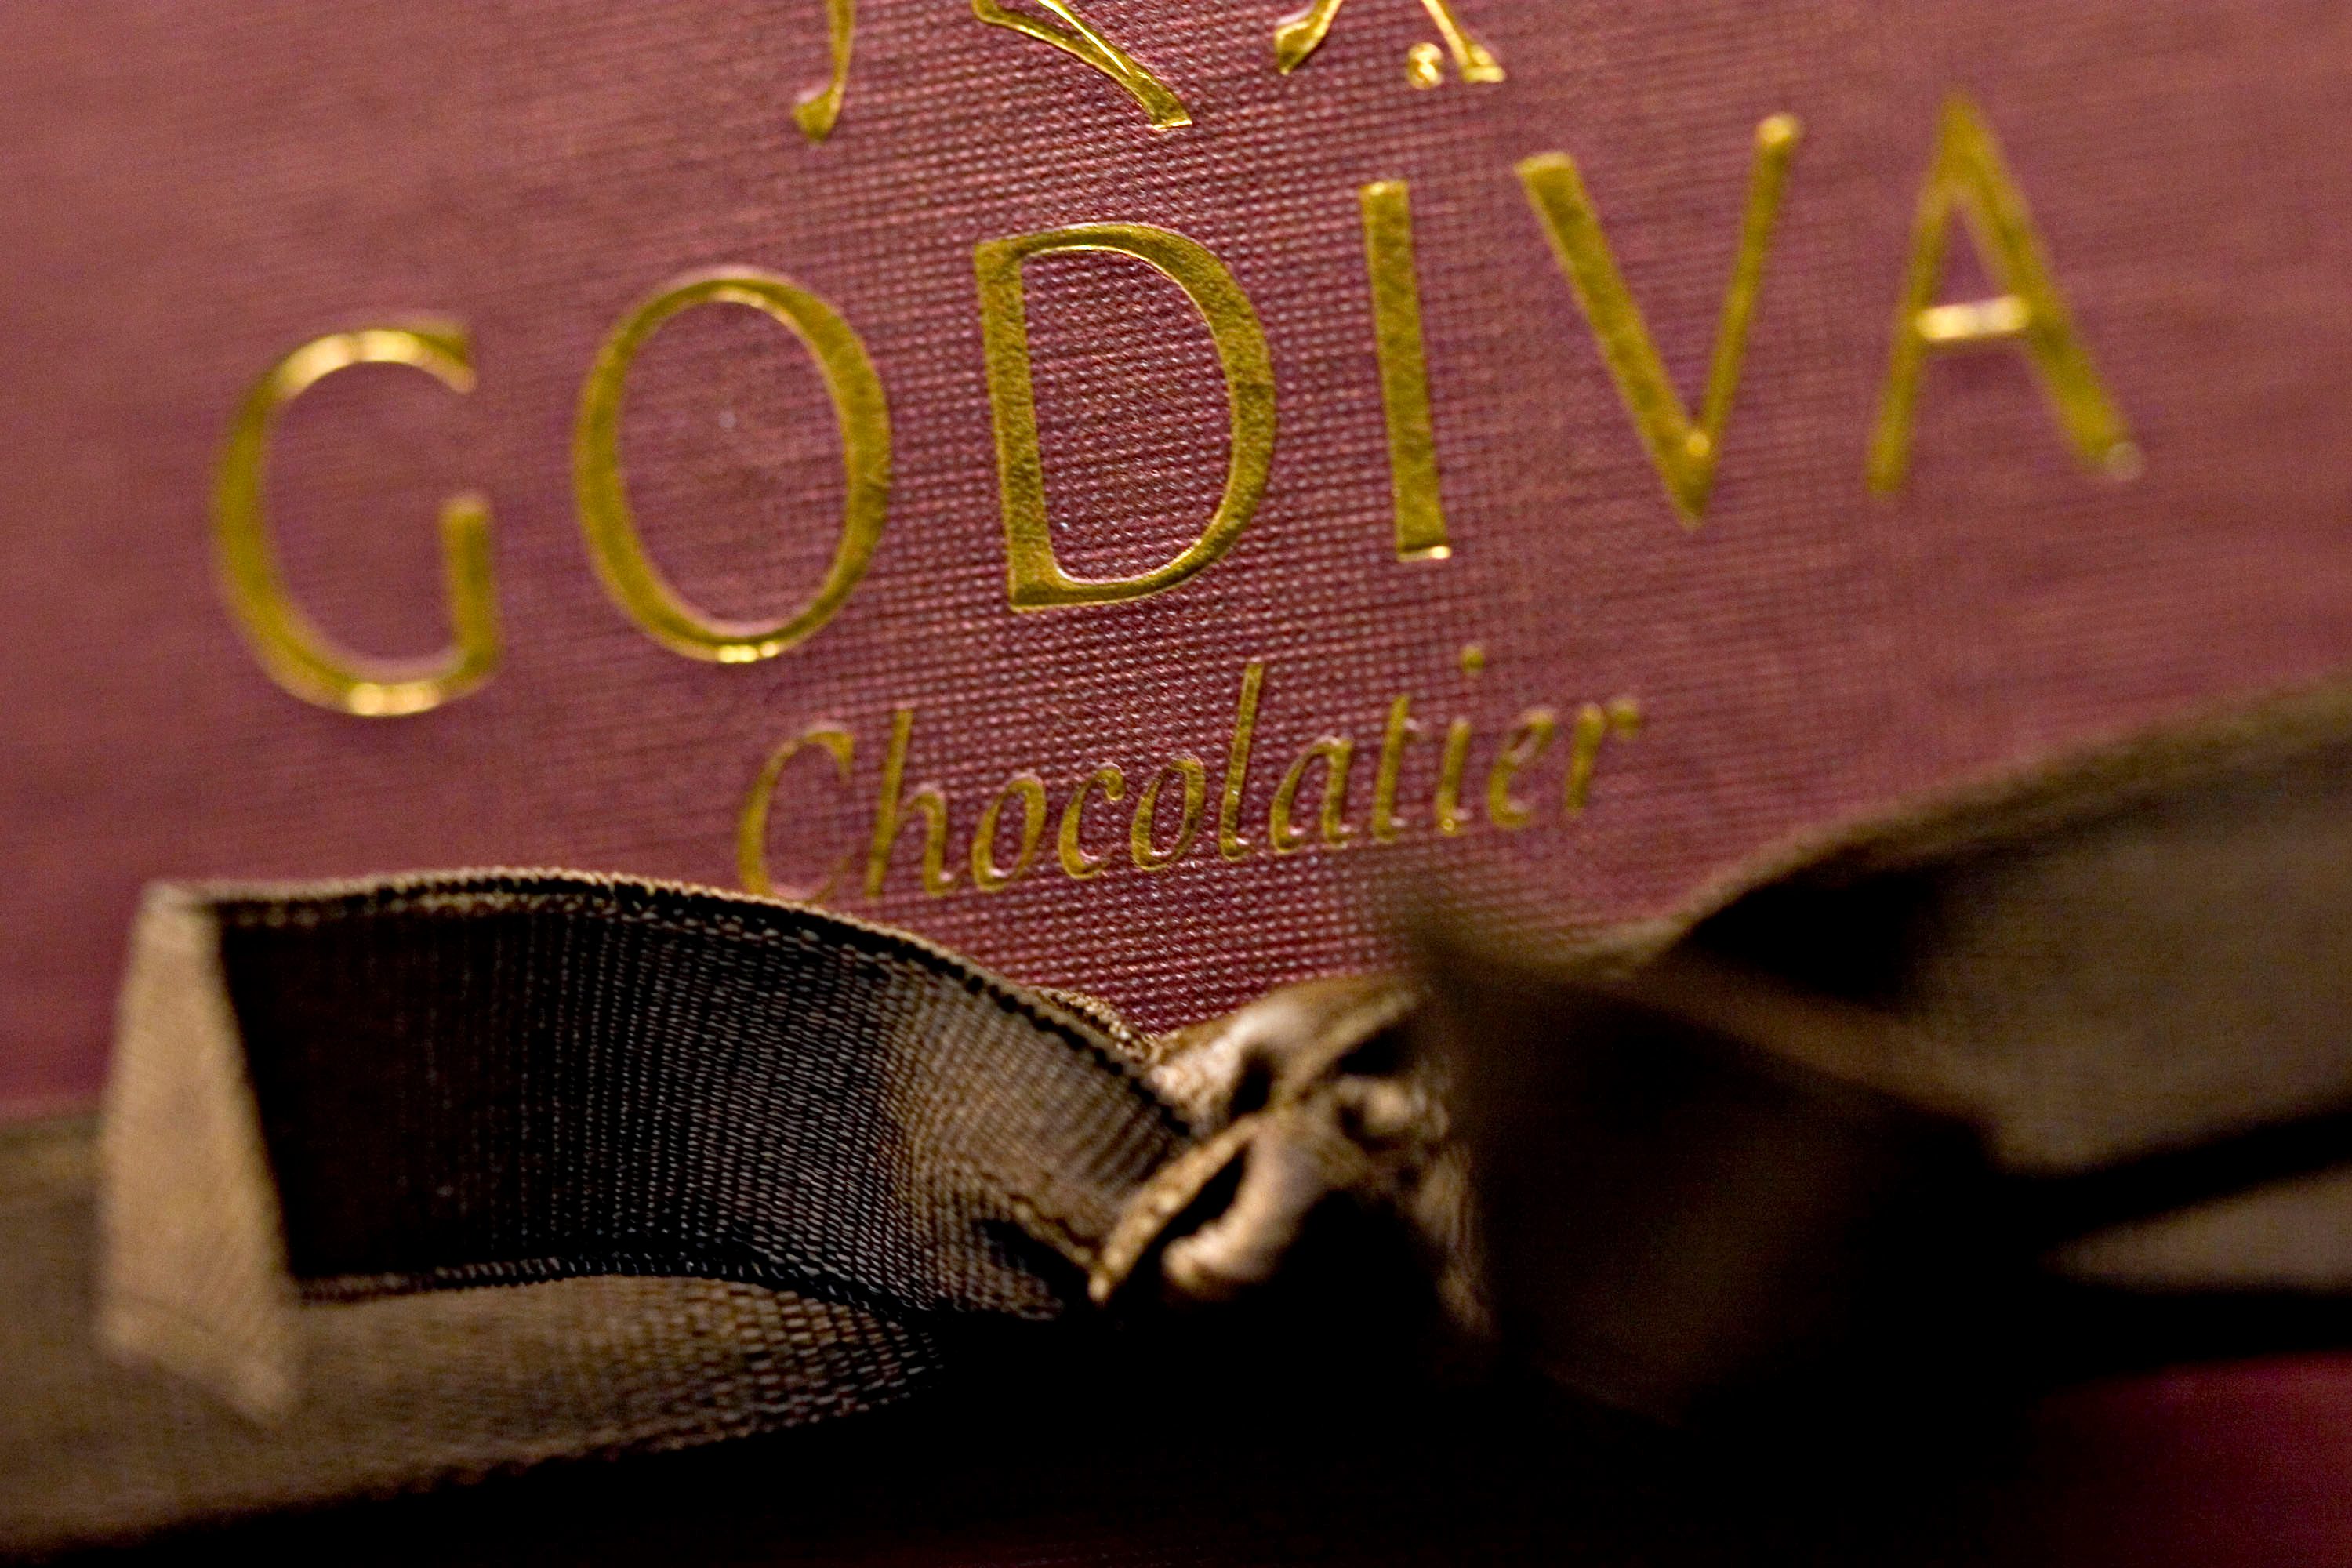 Turkish owner of Godiva accelerates asset sales to support restructuring